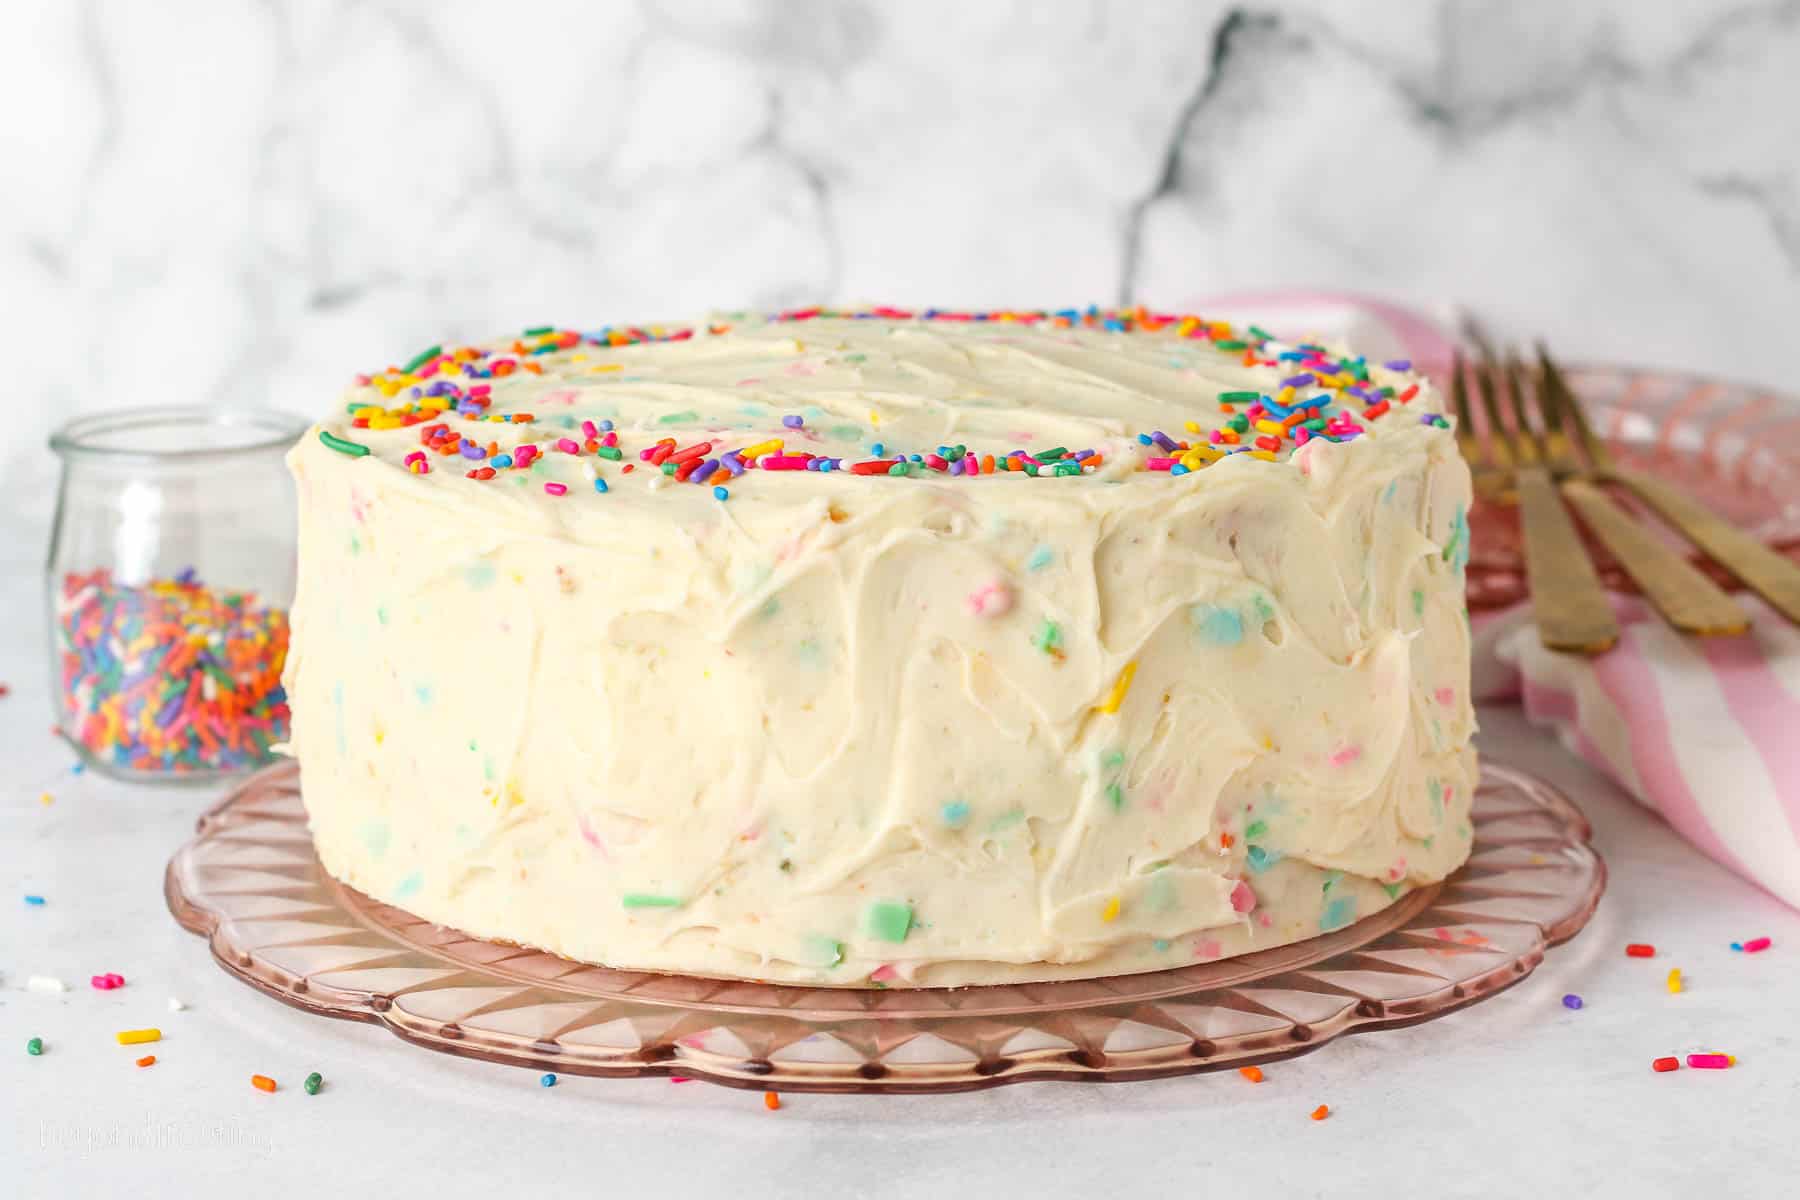 A whole frosted confetti cake decorated with sprinkles on a plate.